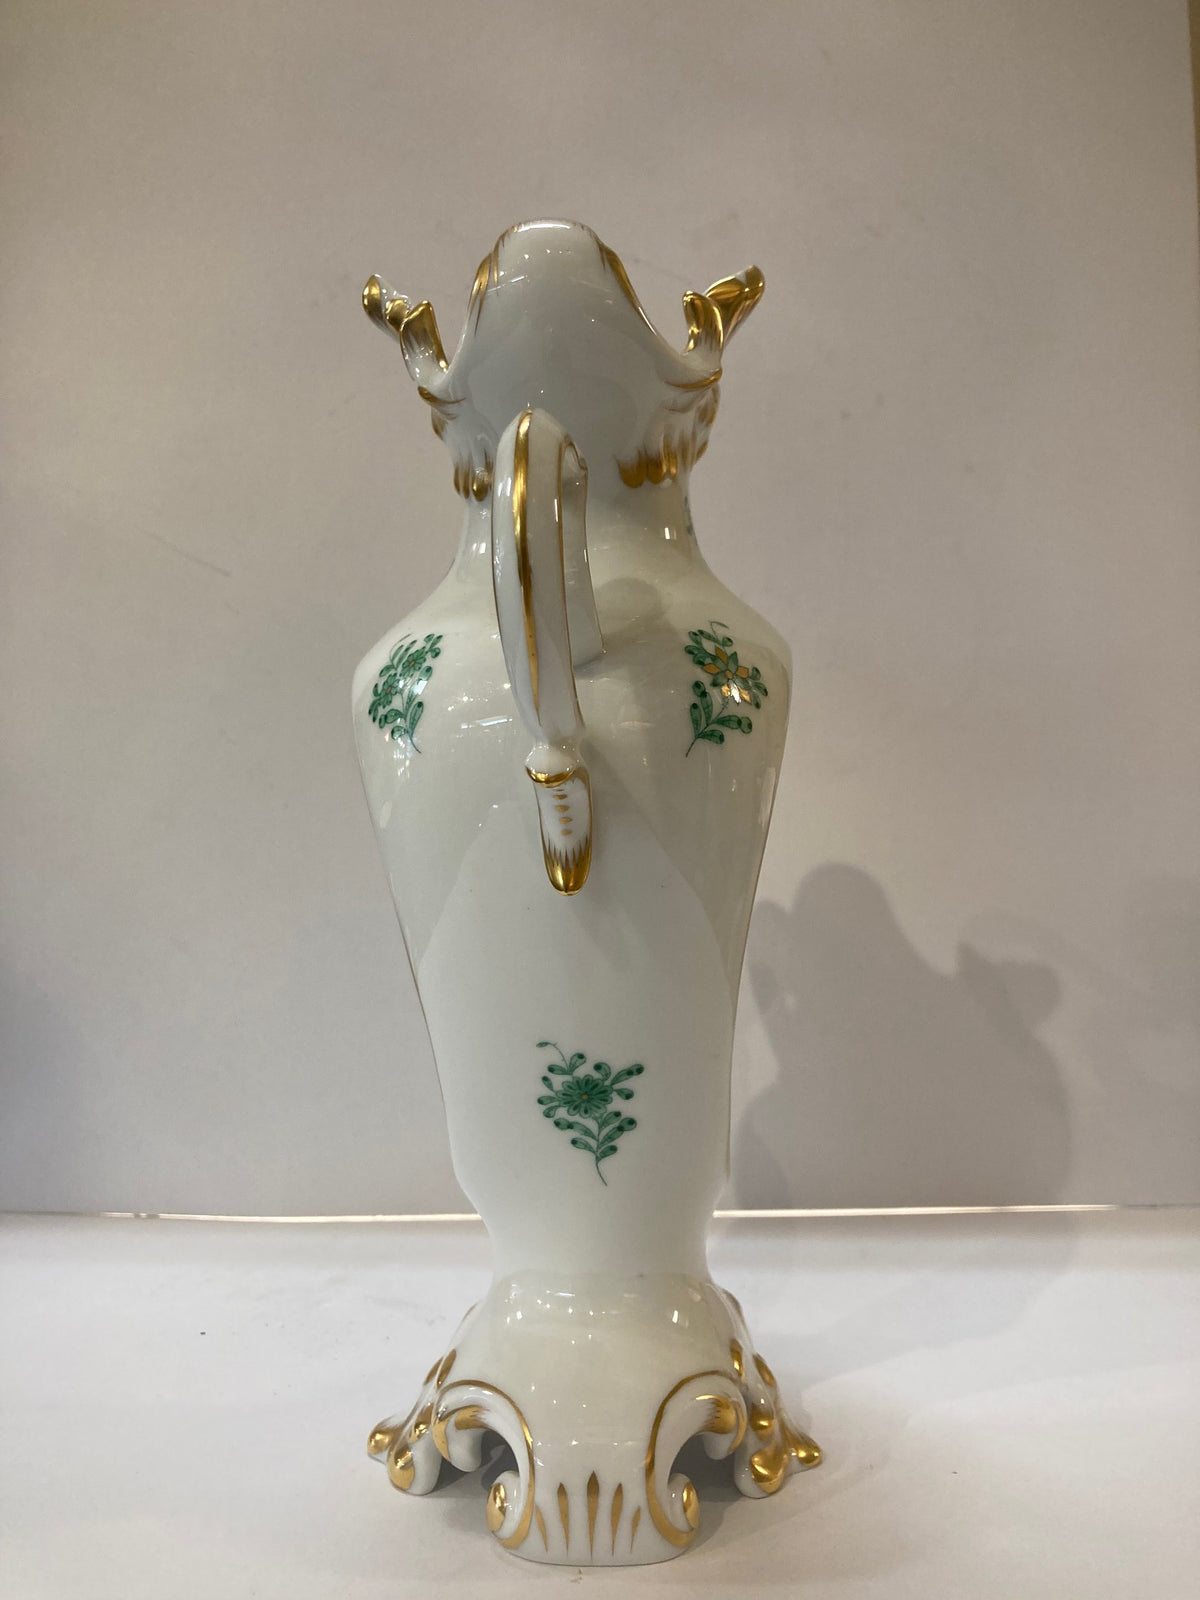 Herend "Chinese Bouquet" Green Vase